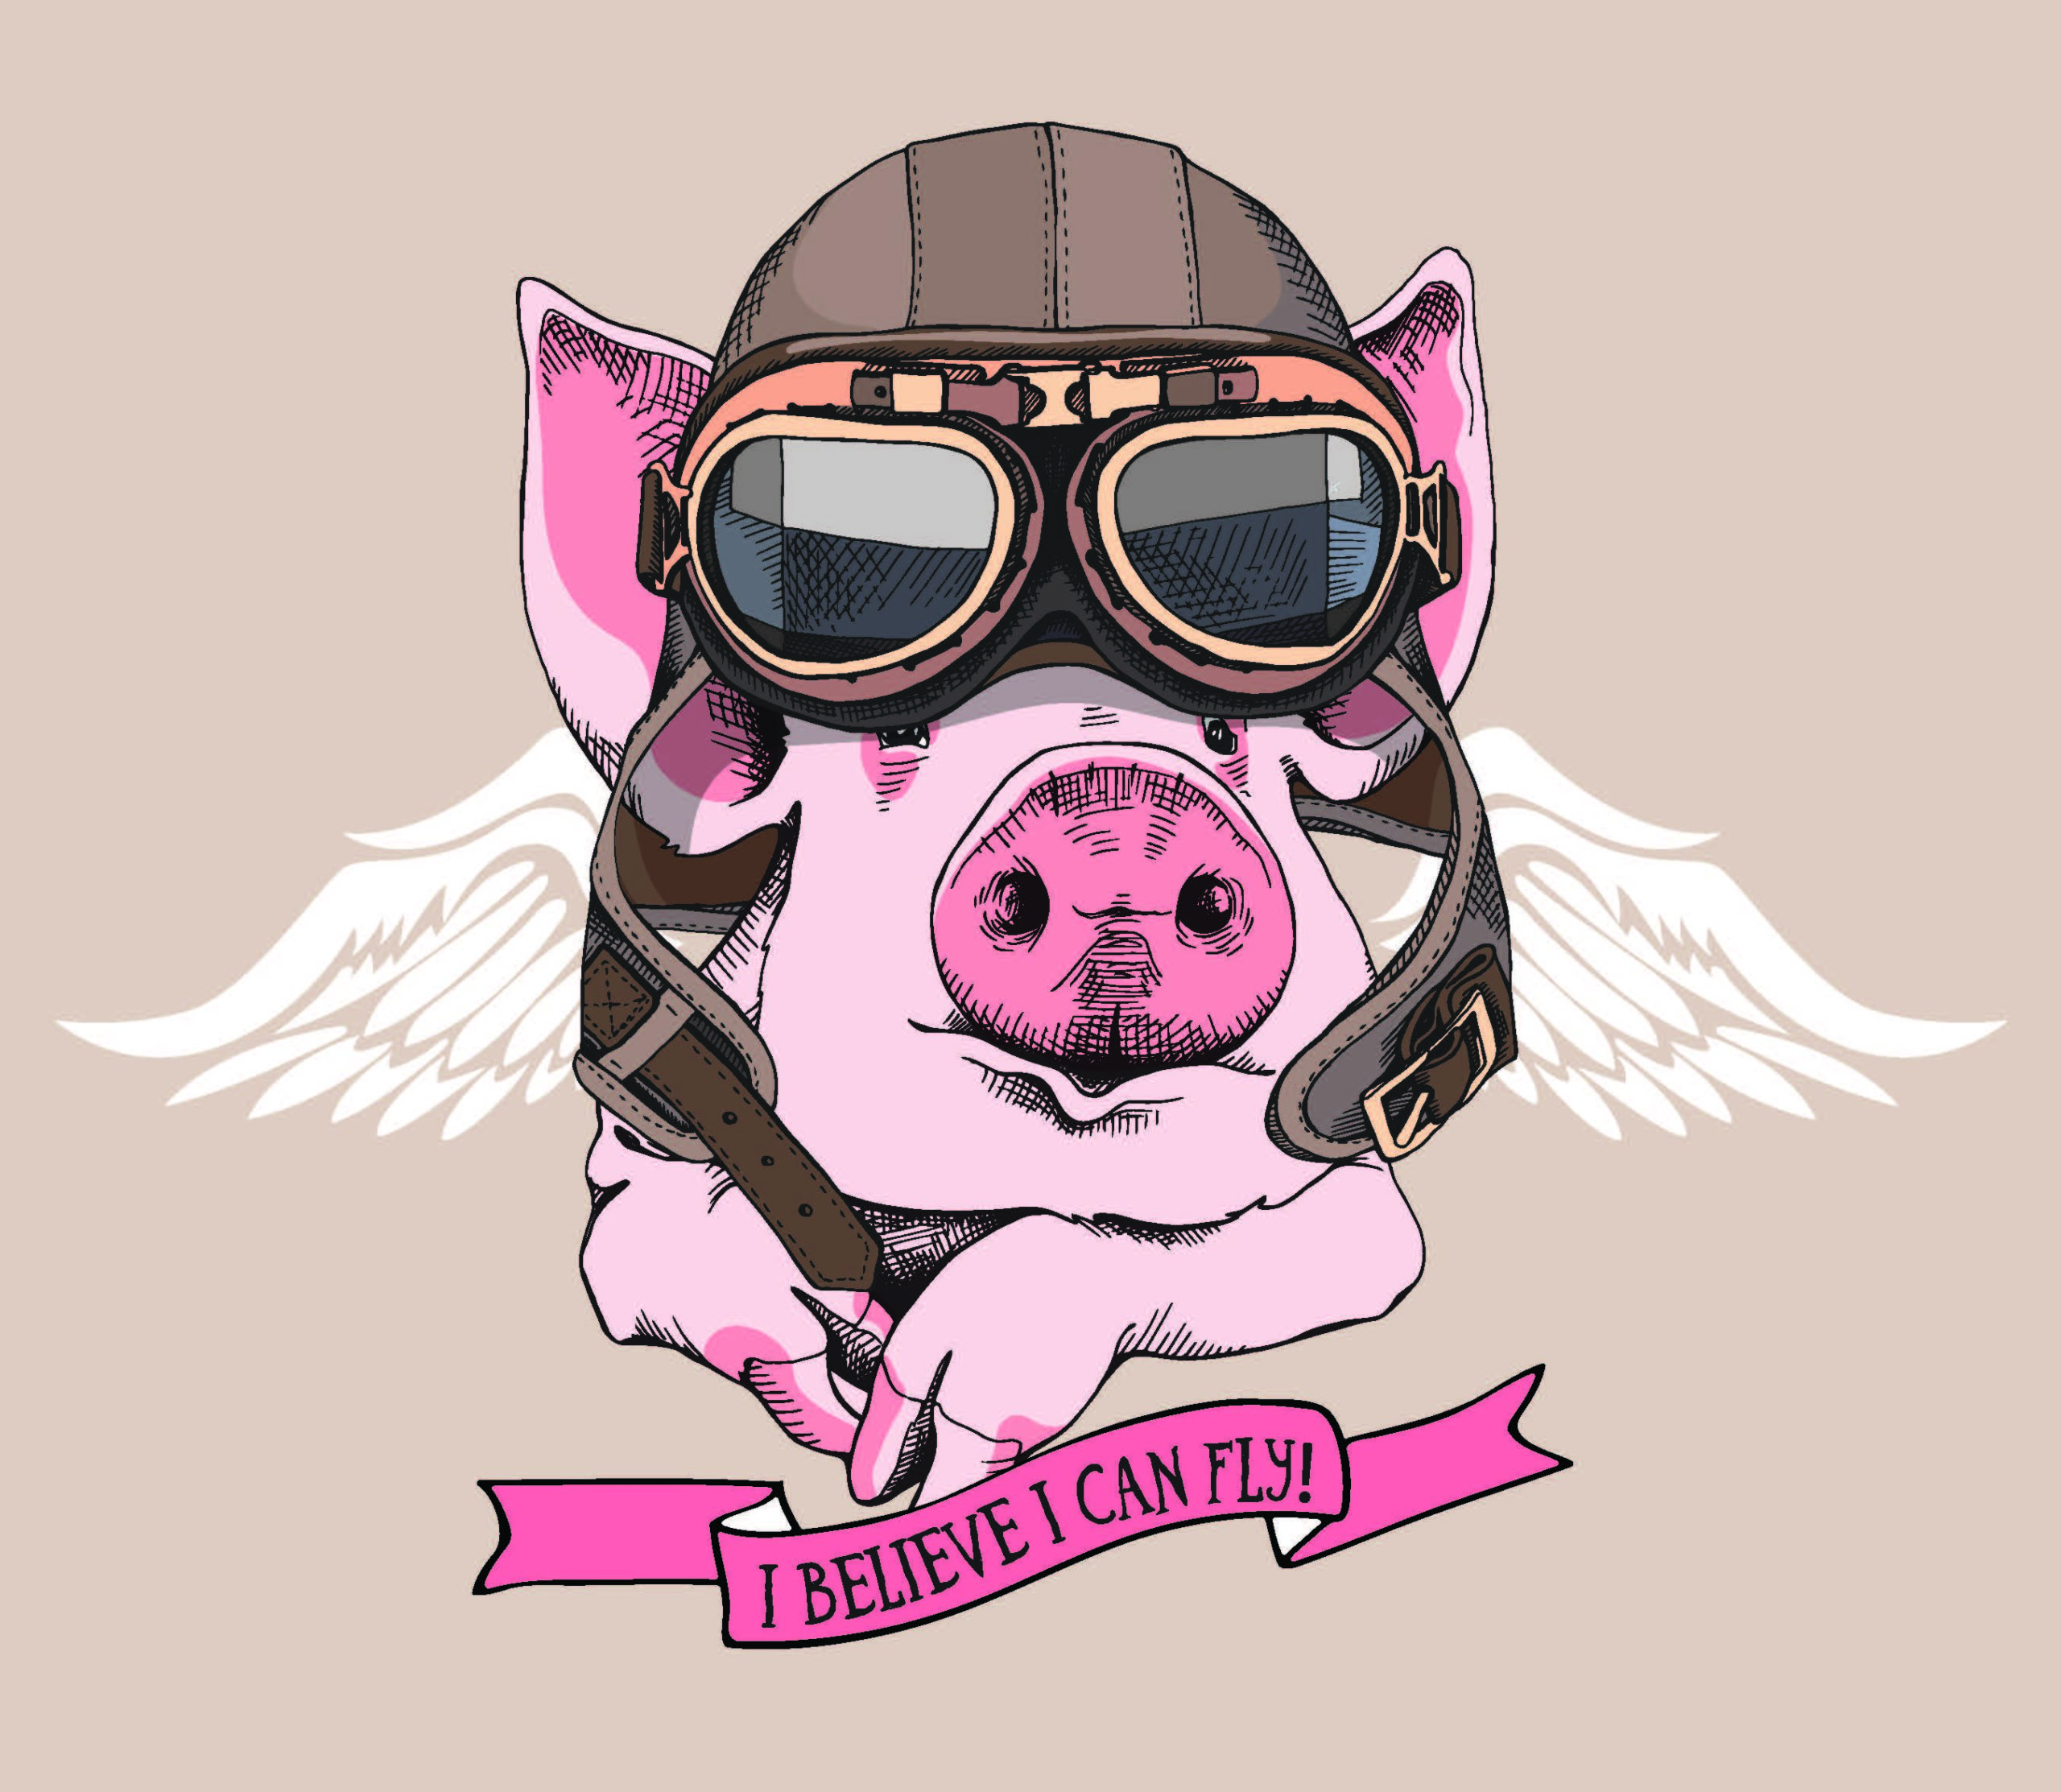 When pigs might fly